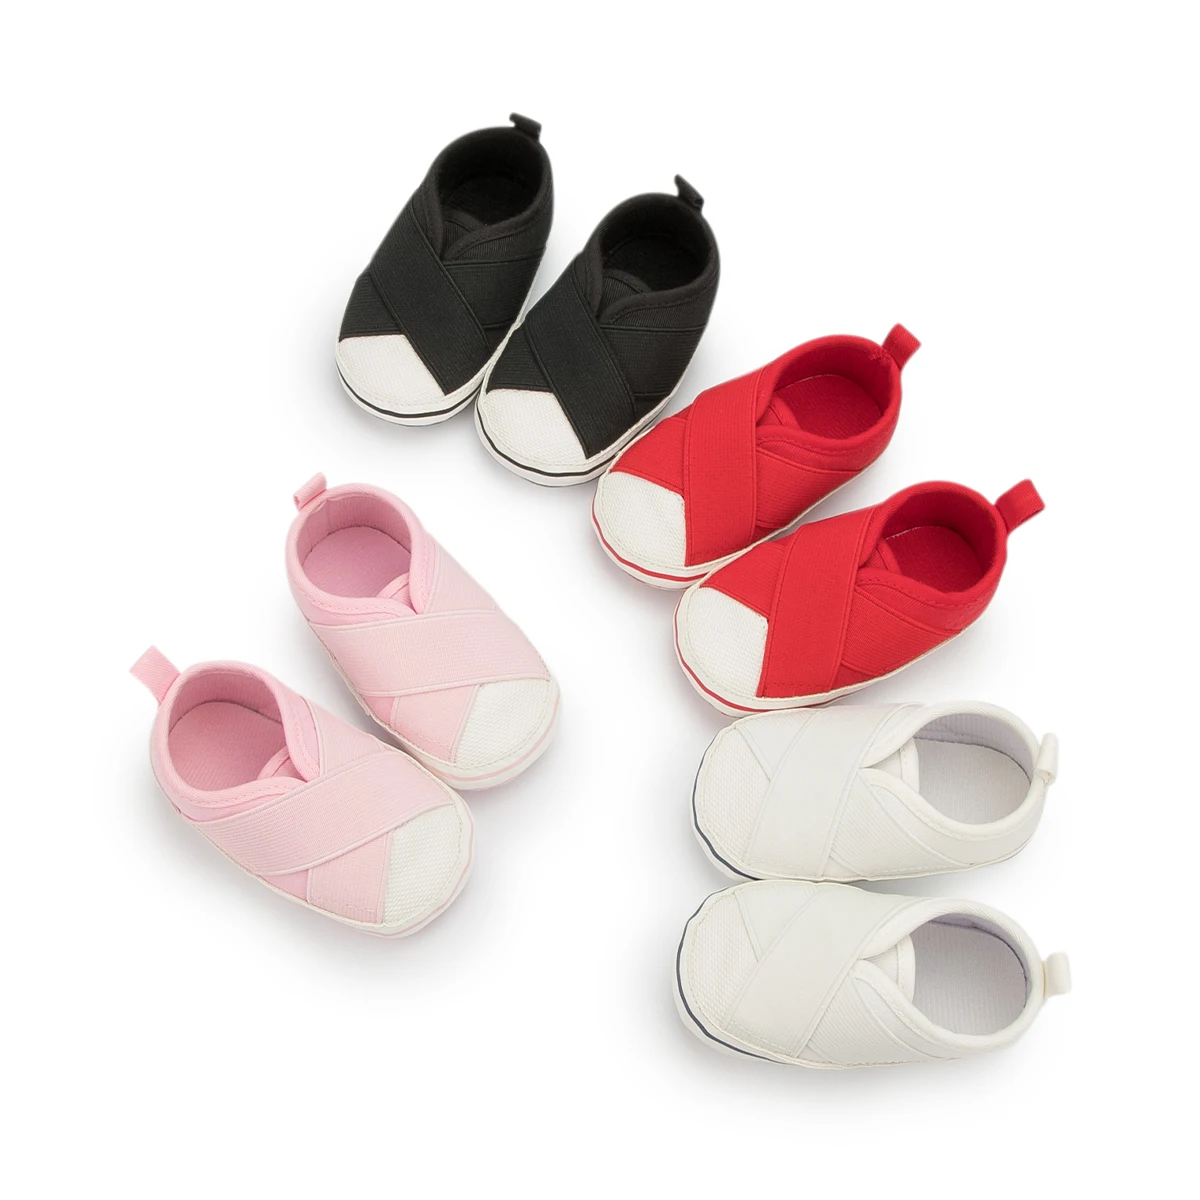 

Hot selling 2021 Canvas upper Rubber sole prewalk infant boy girl baby casual shoes, 4 colors